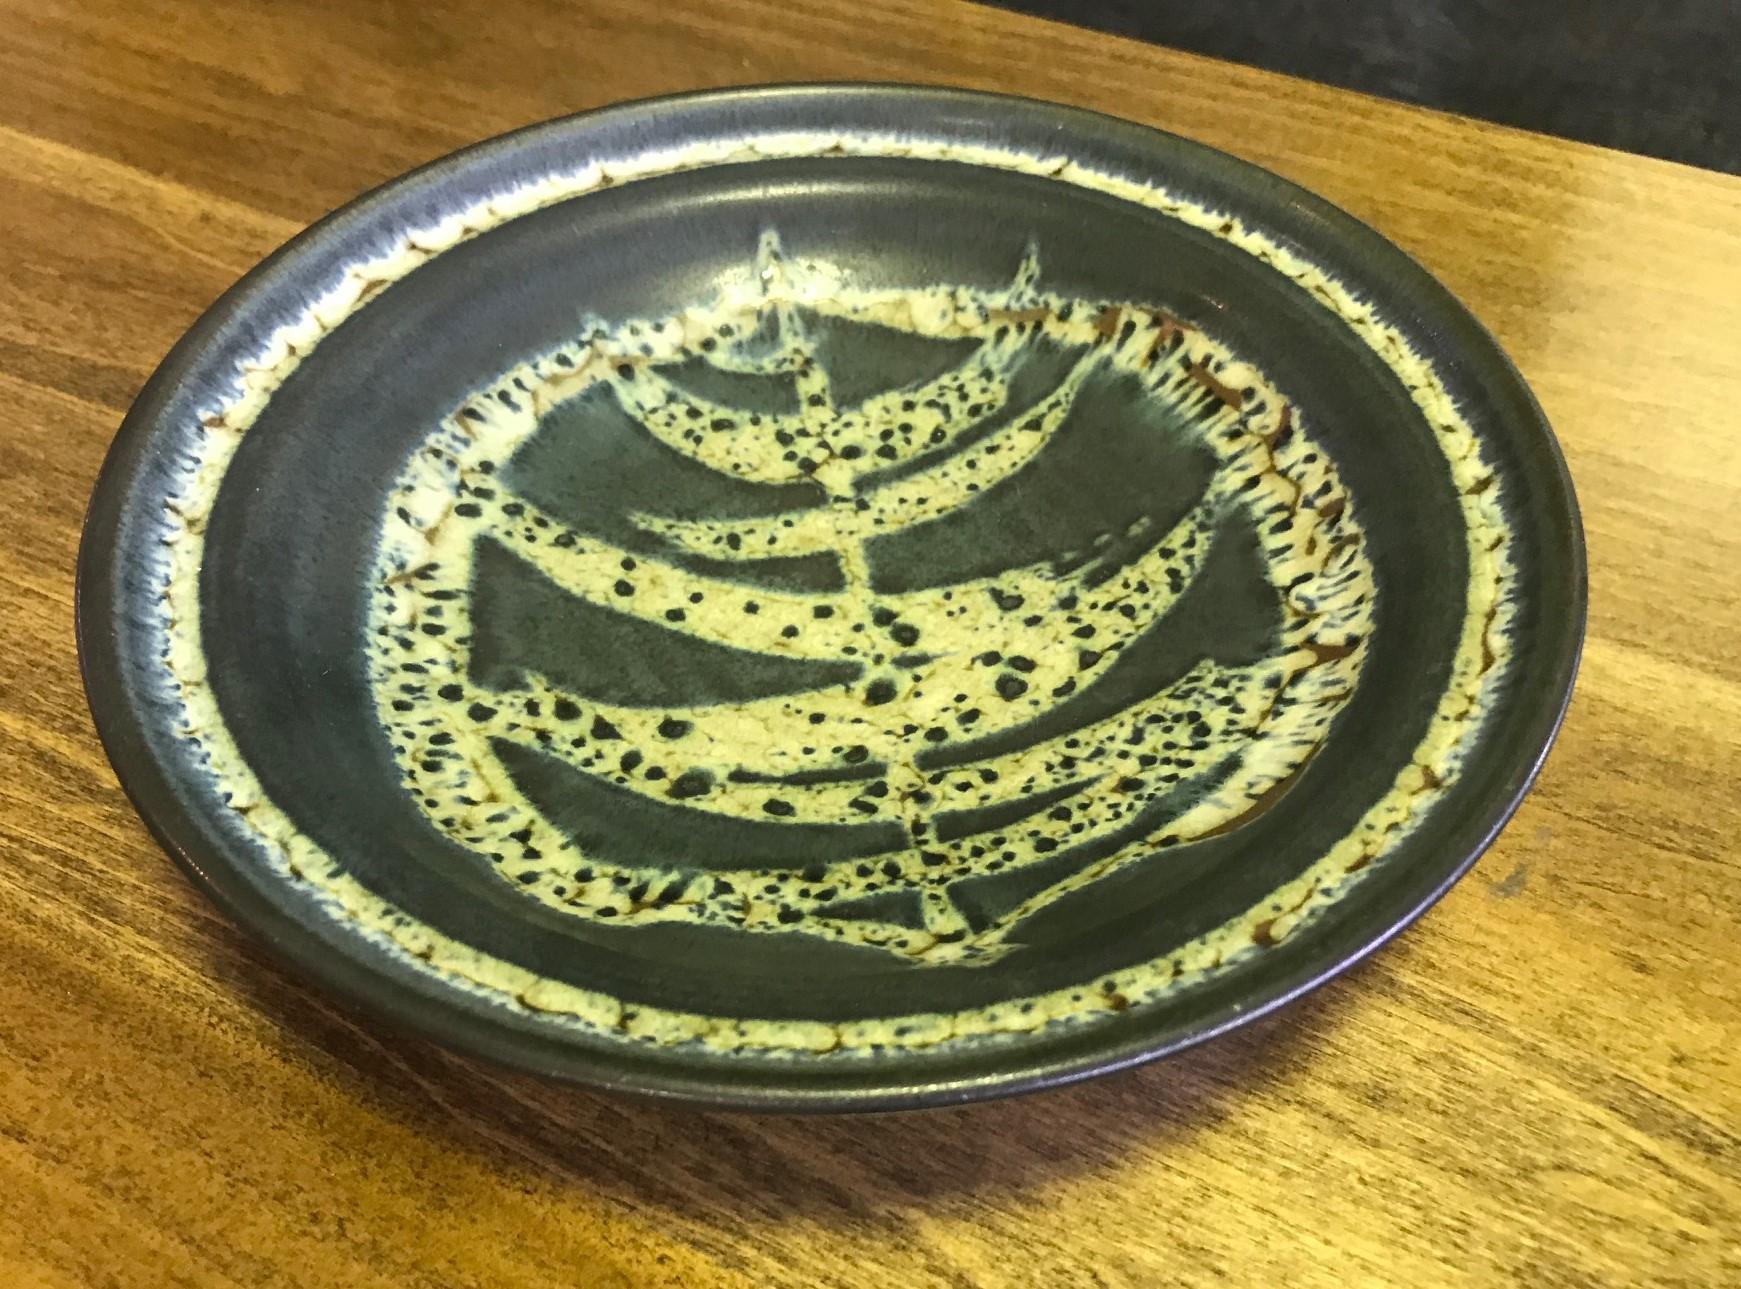 An exquisitely designed and decorated bowl by renowned American West Coast Californian master ceramist Harrison Mcintosh who was famed for his Mid-Century Modern style of ceramics.

McIntosh's works have been exhibited in such acclaimed venues as